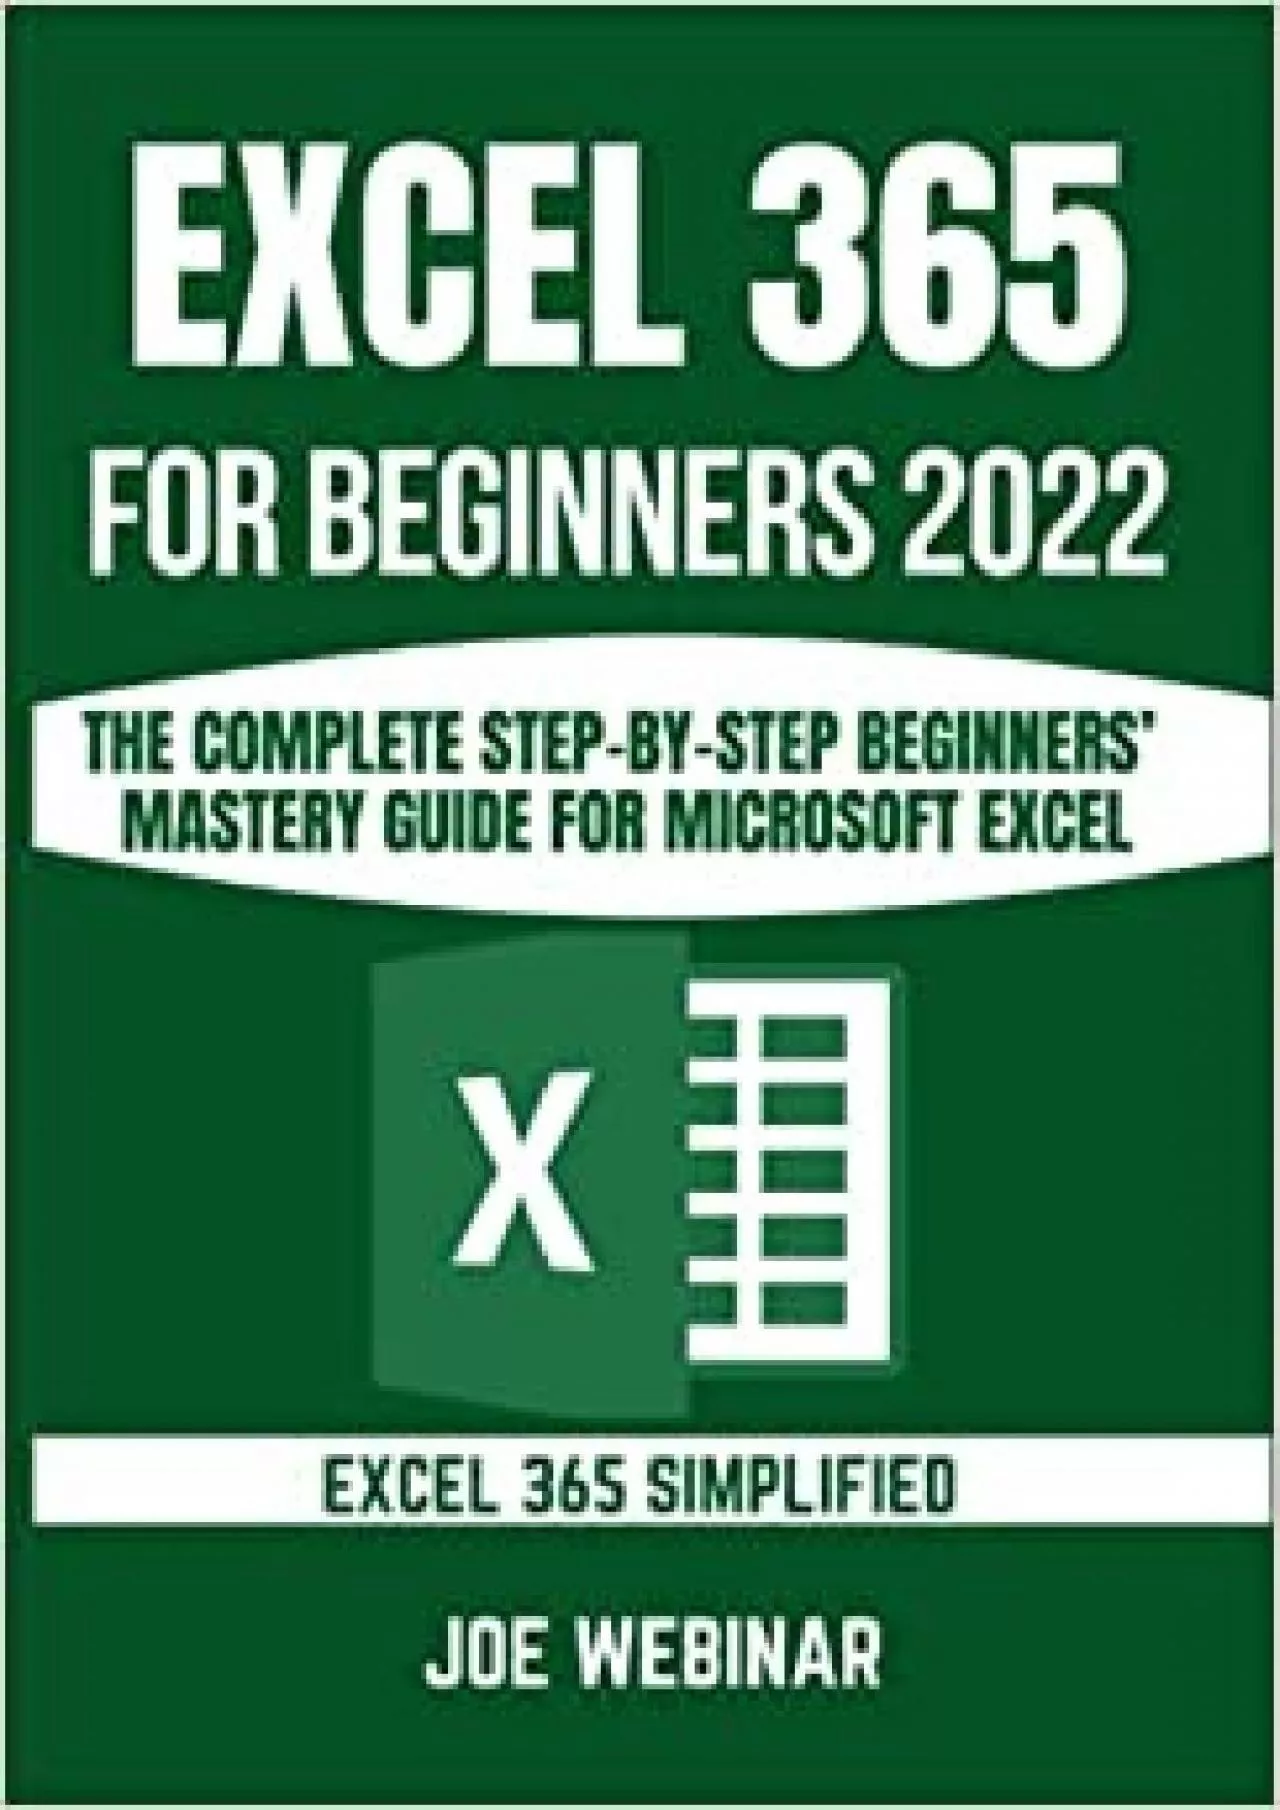 (EBOOK)-EXCEL 365 FOR BEGINNERS 2022: THE COMPLETE BEGINNERS’ MASTERY GUIDE FOR MICROSOFT